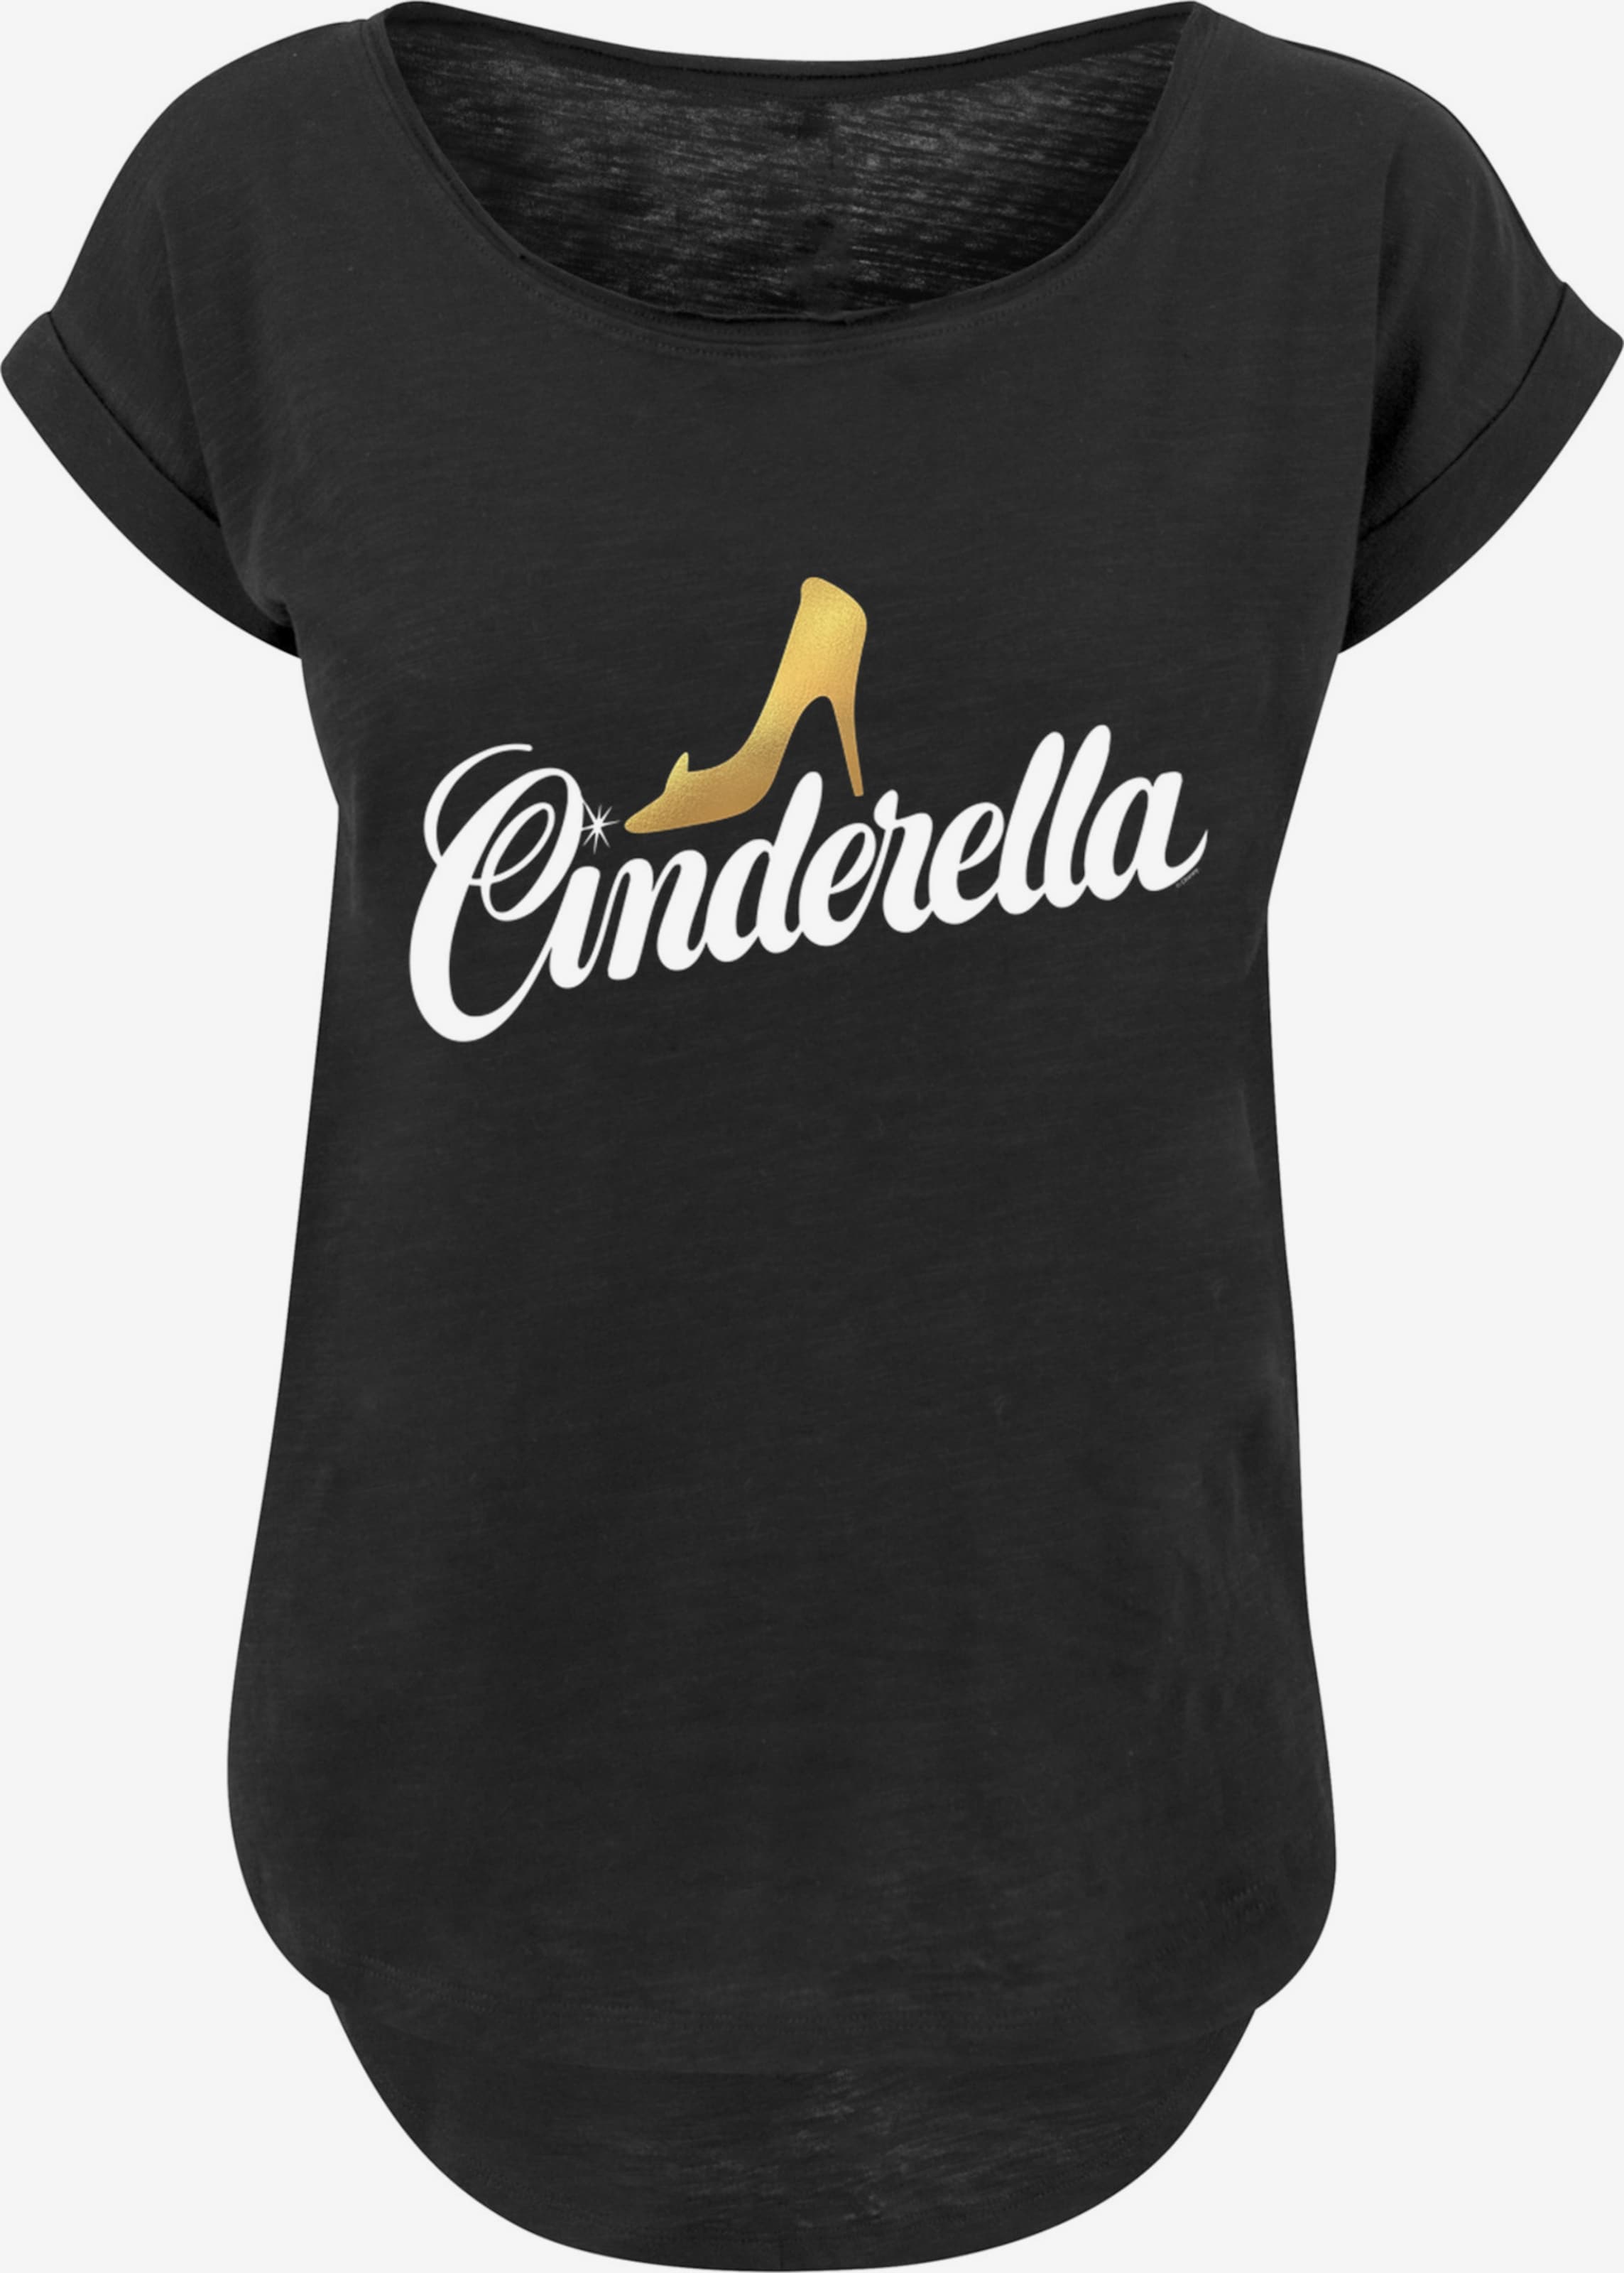 Logo\' Black Shoe YOU | F4NT4STIC \'Cinderella ABOUT Shirt in